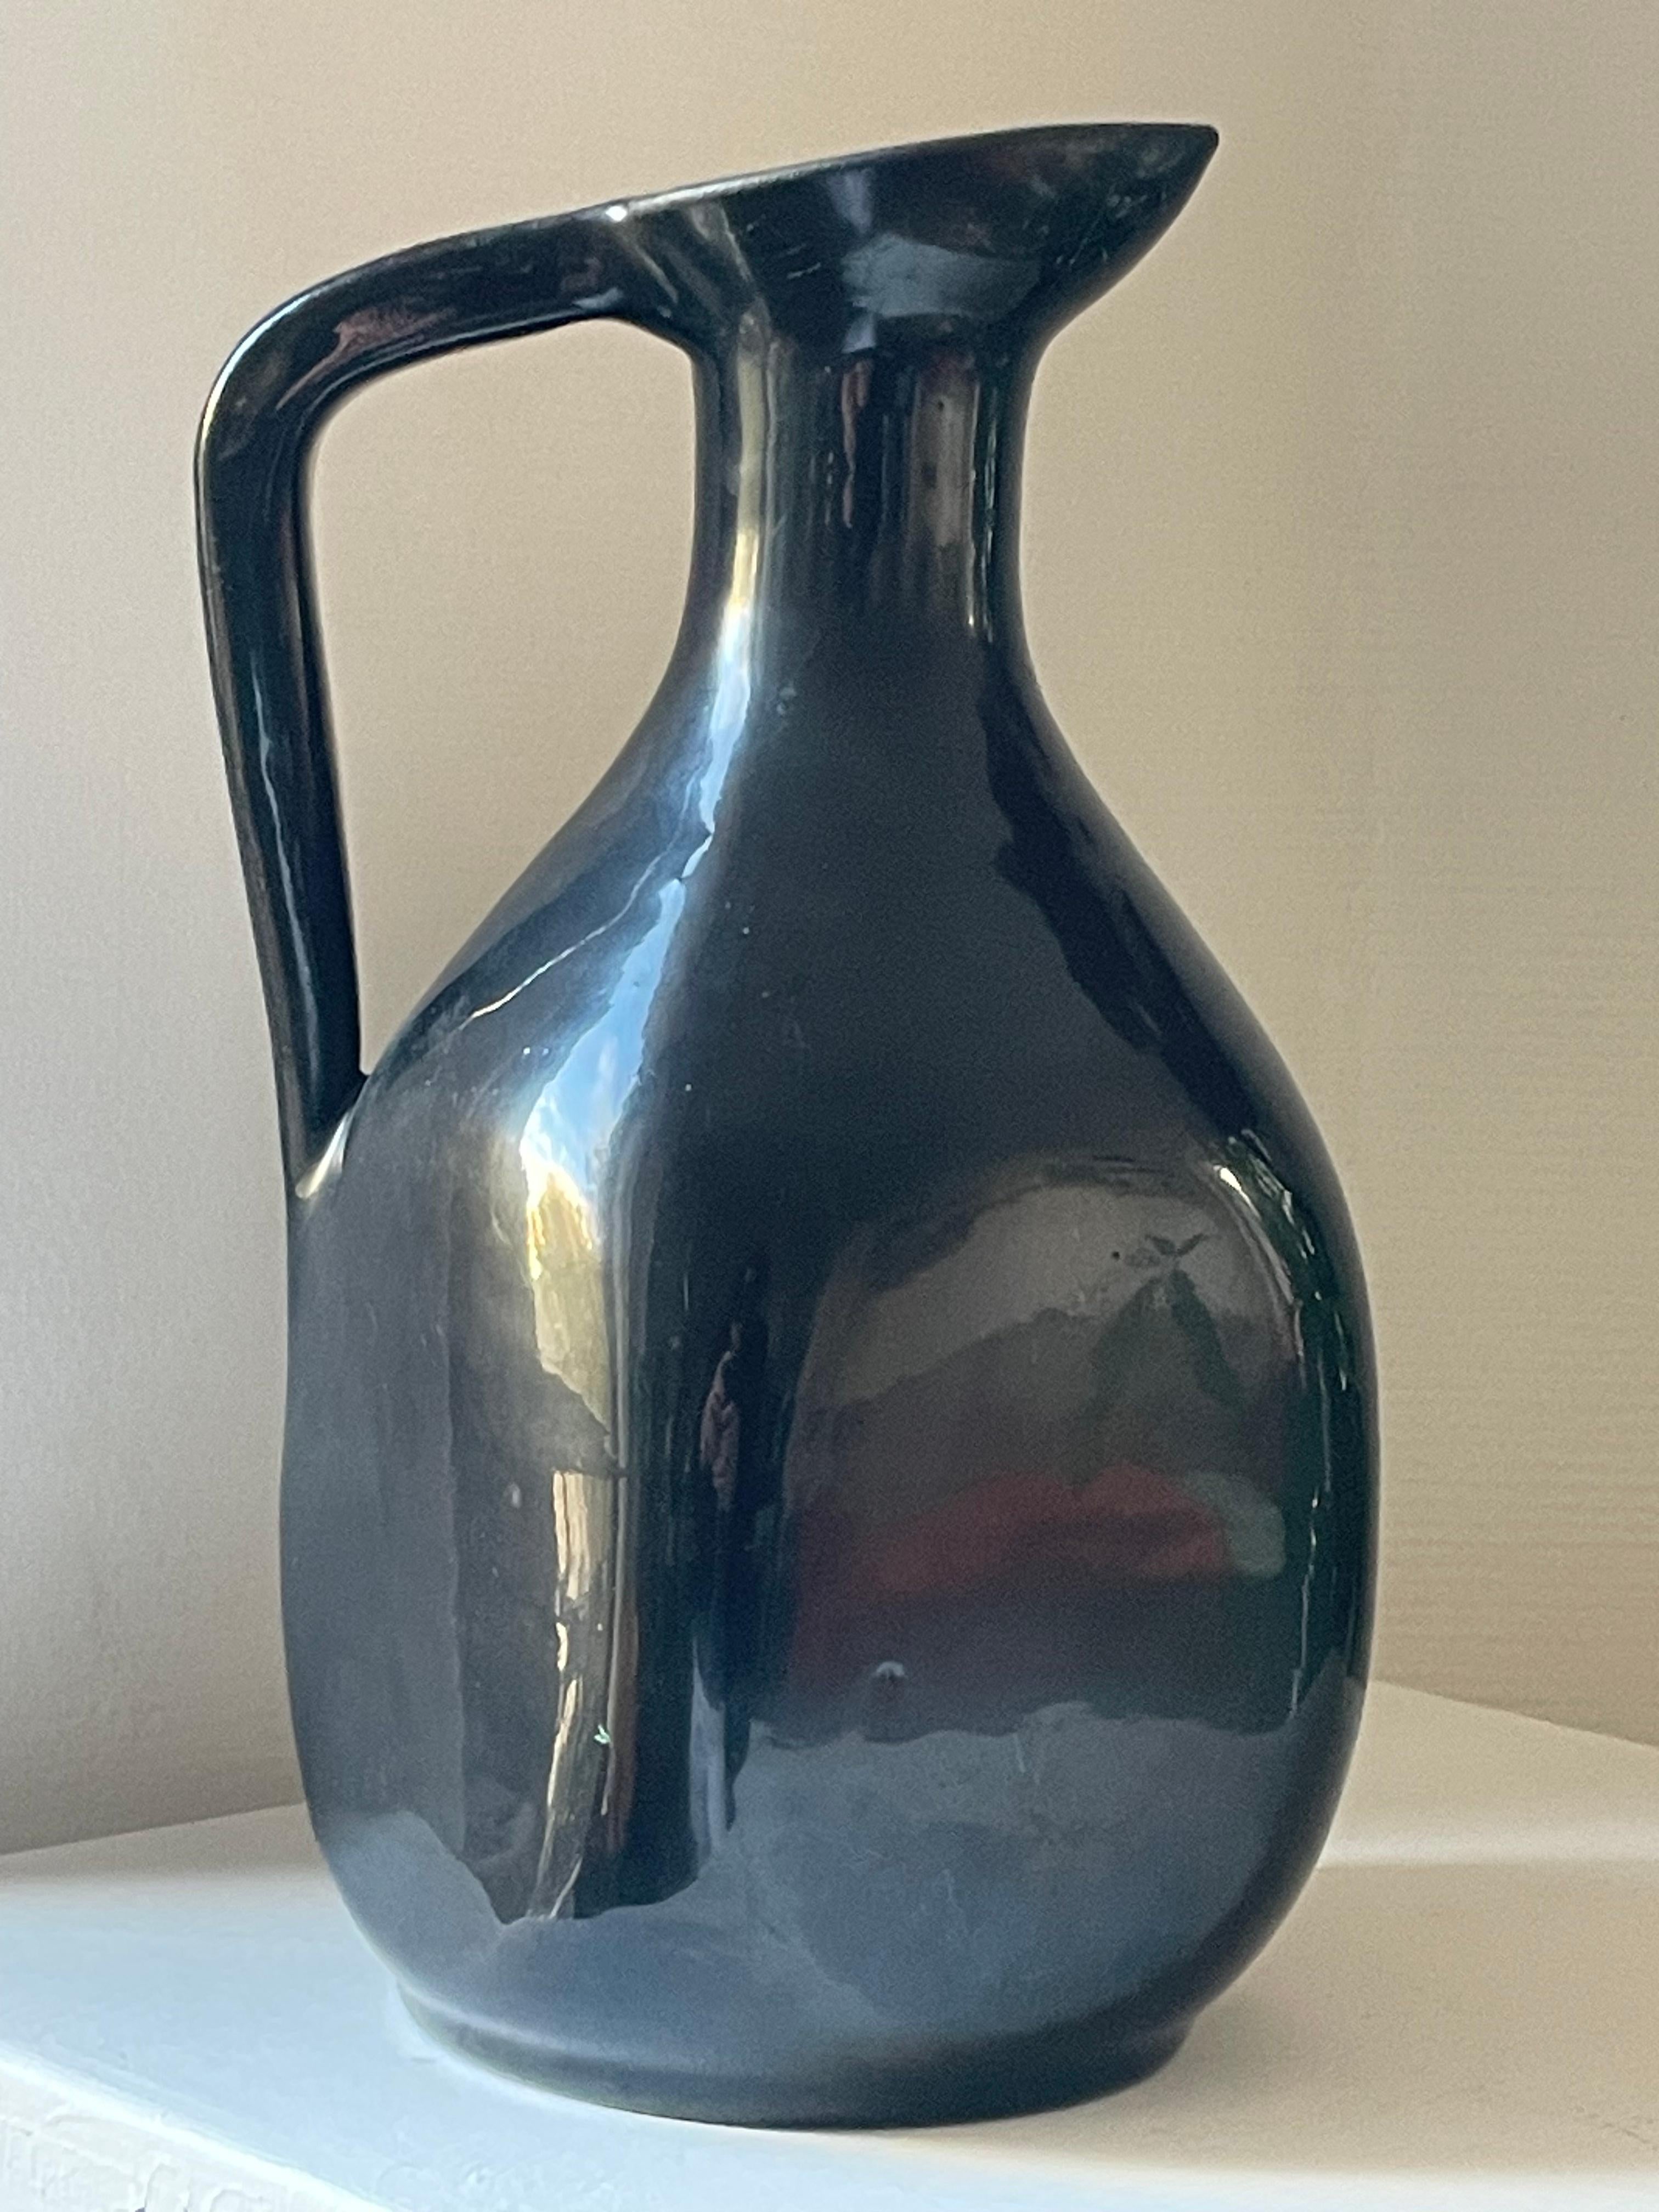 Black glazed ceramic pitcher by Accolay potters, circa 1950
H22cm
Rare model
excellent condition
Signature on base